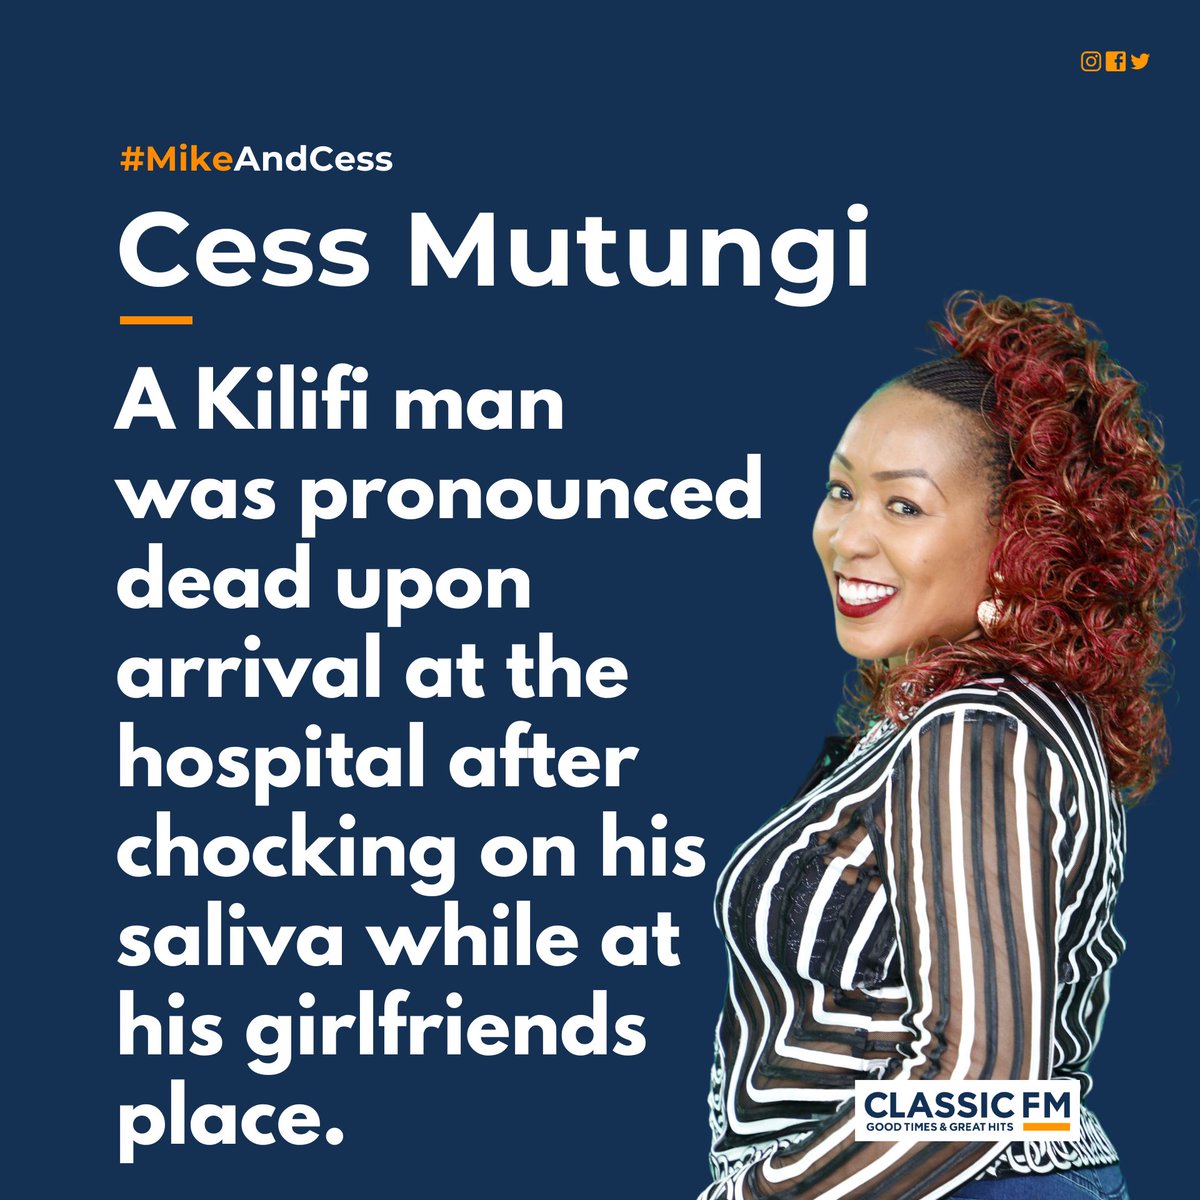 Cess Mutungi: I think there is more to the story. What do you think?

#MikeAndCess